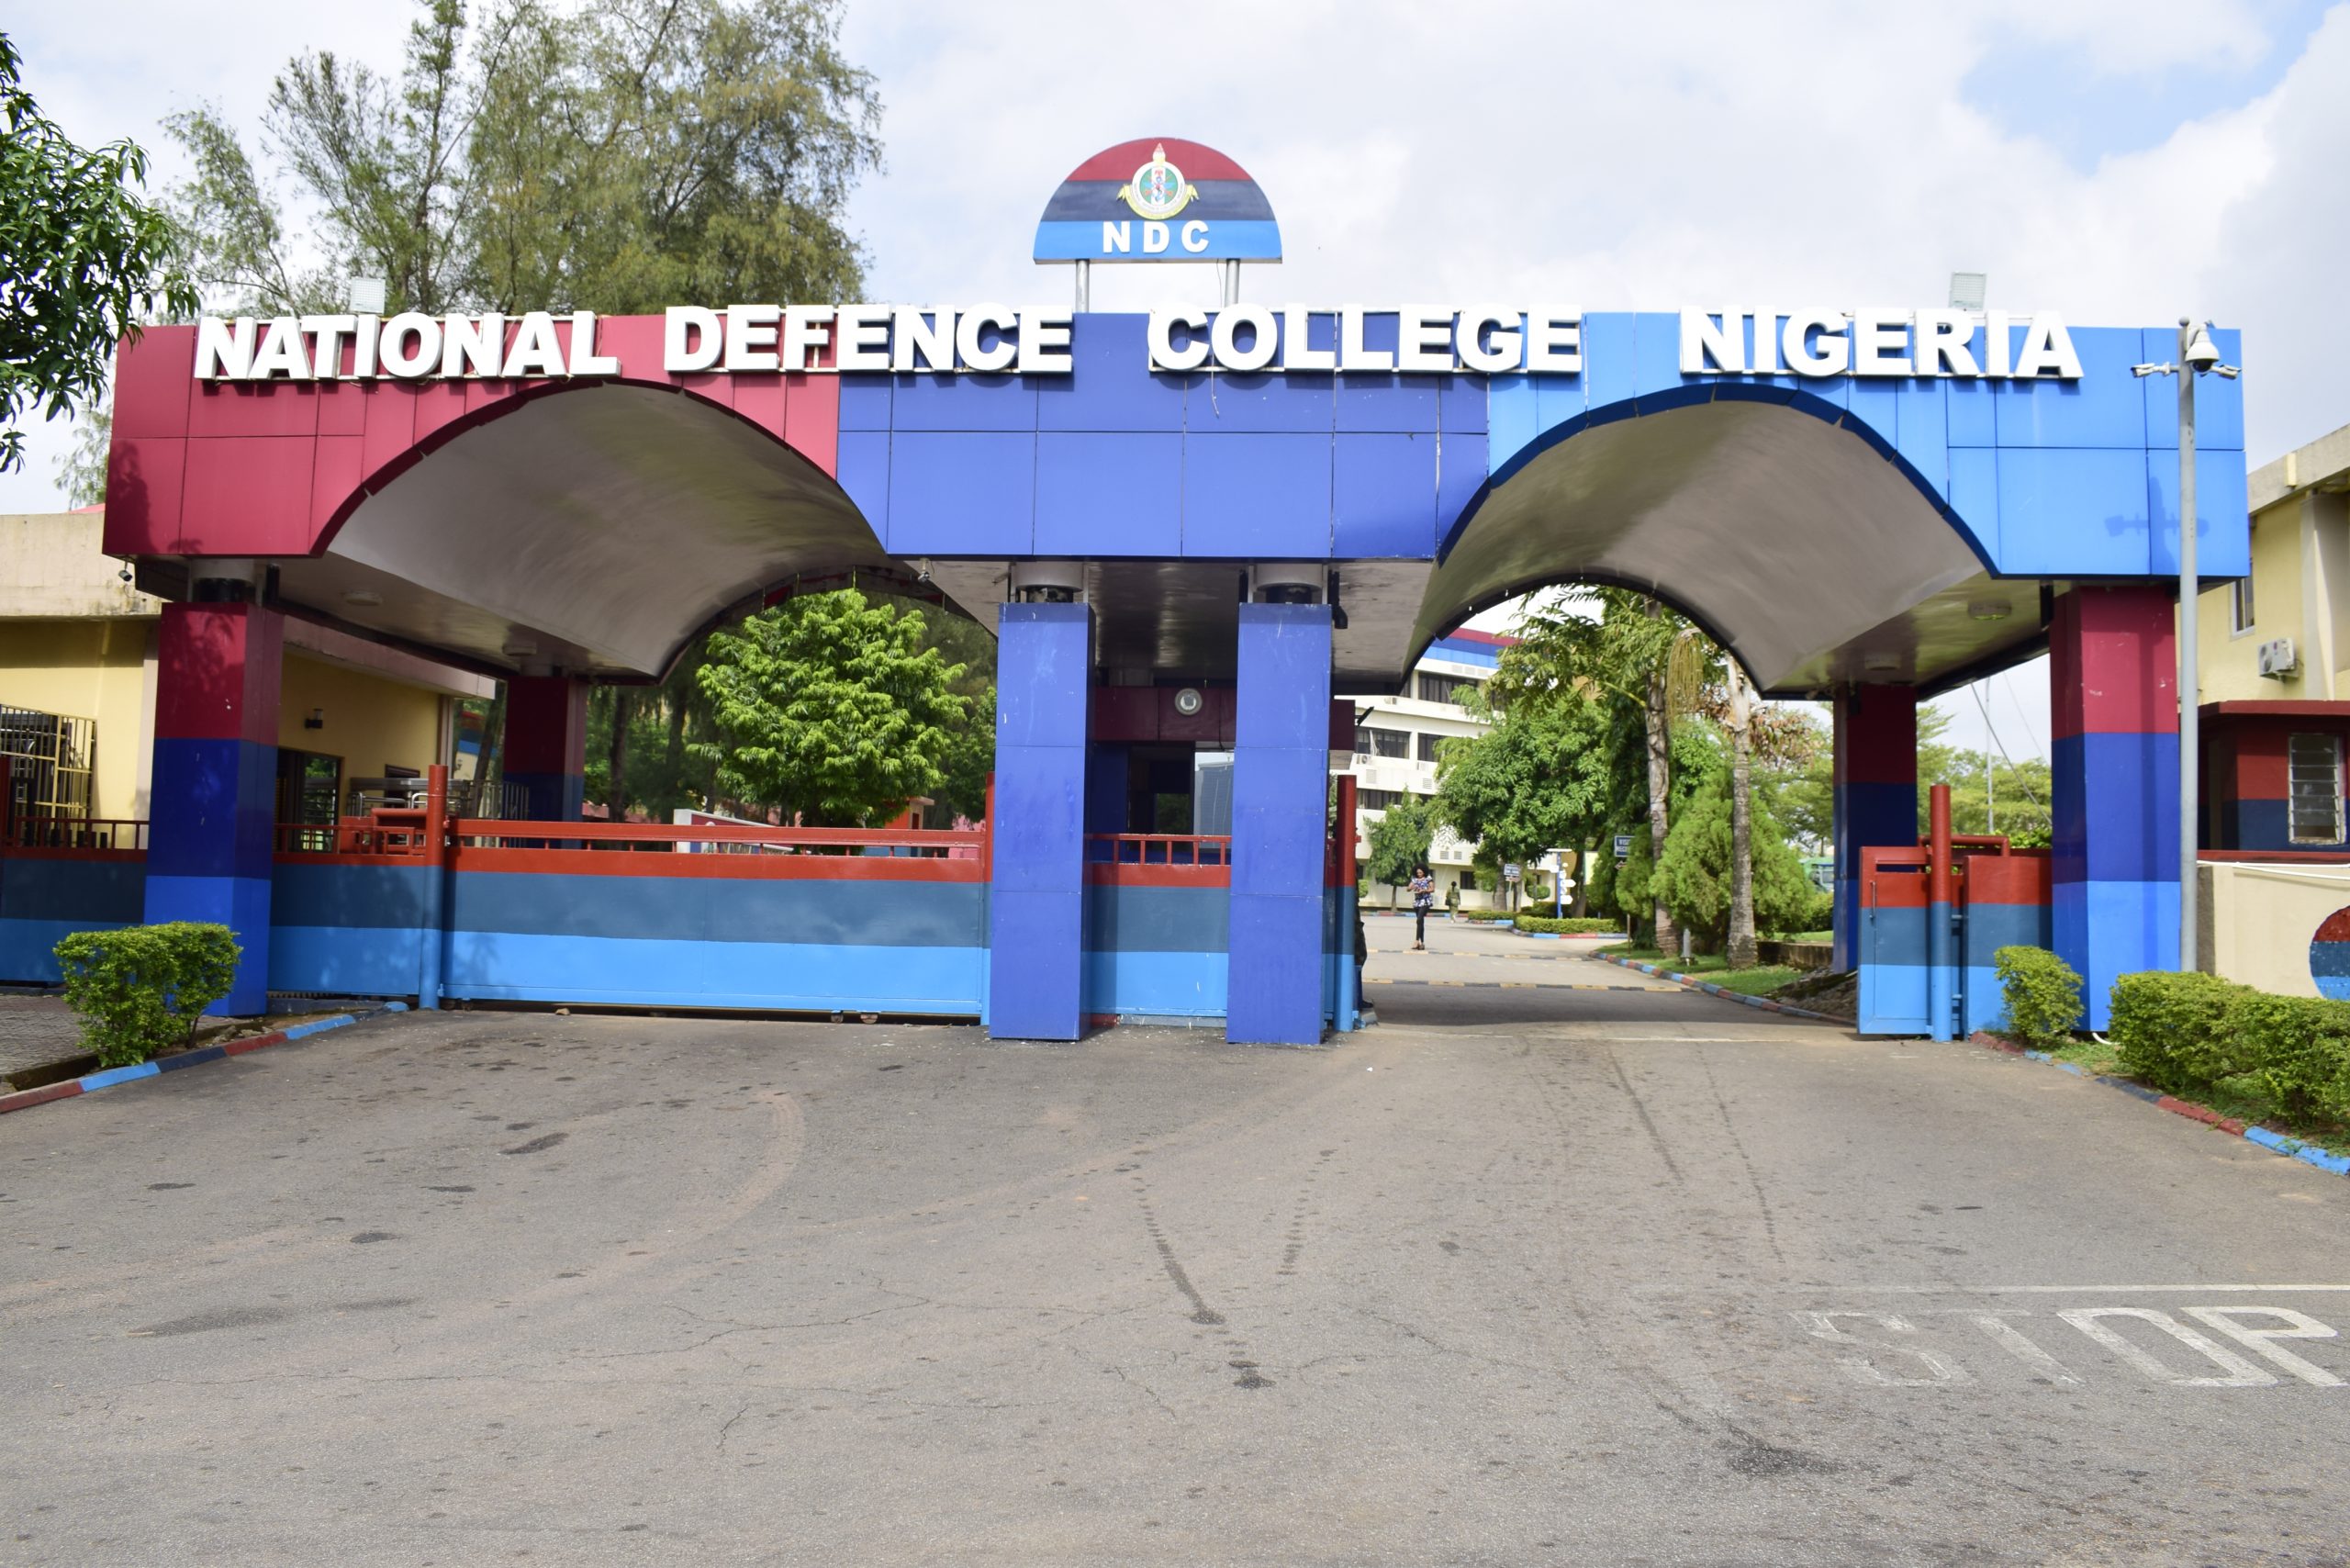 Defence College Can Provide Solution to Nigeria Security Challenges- Reps Speaker